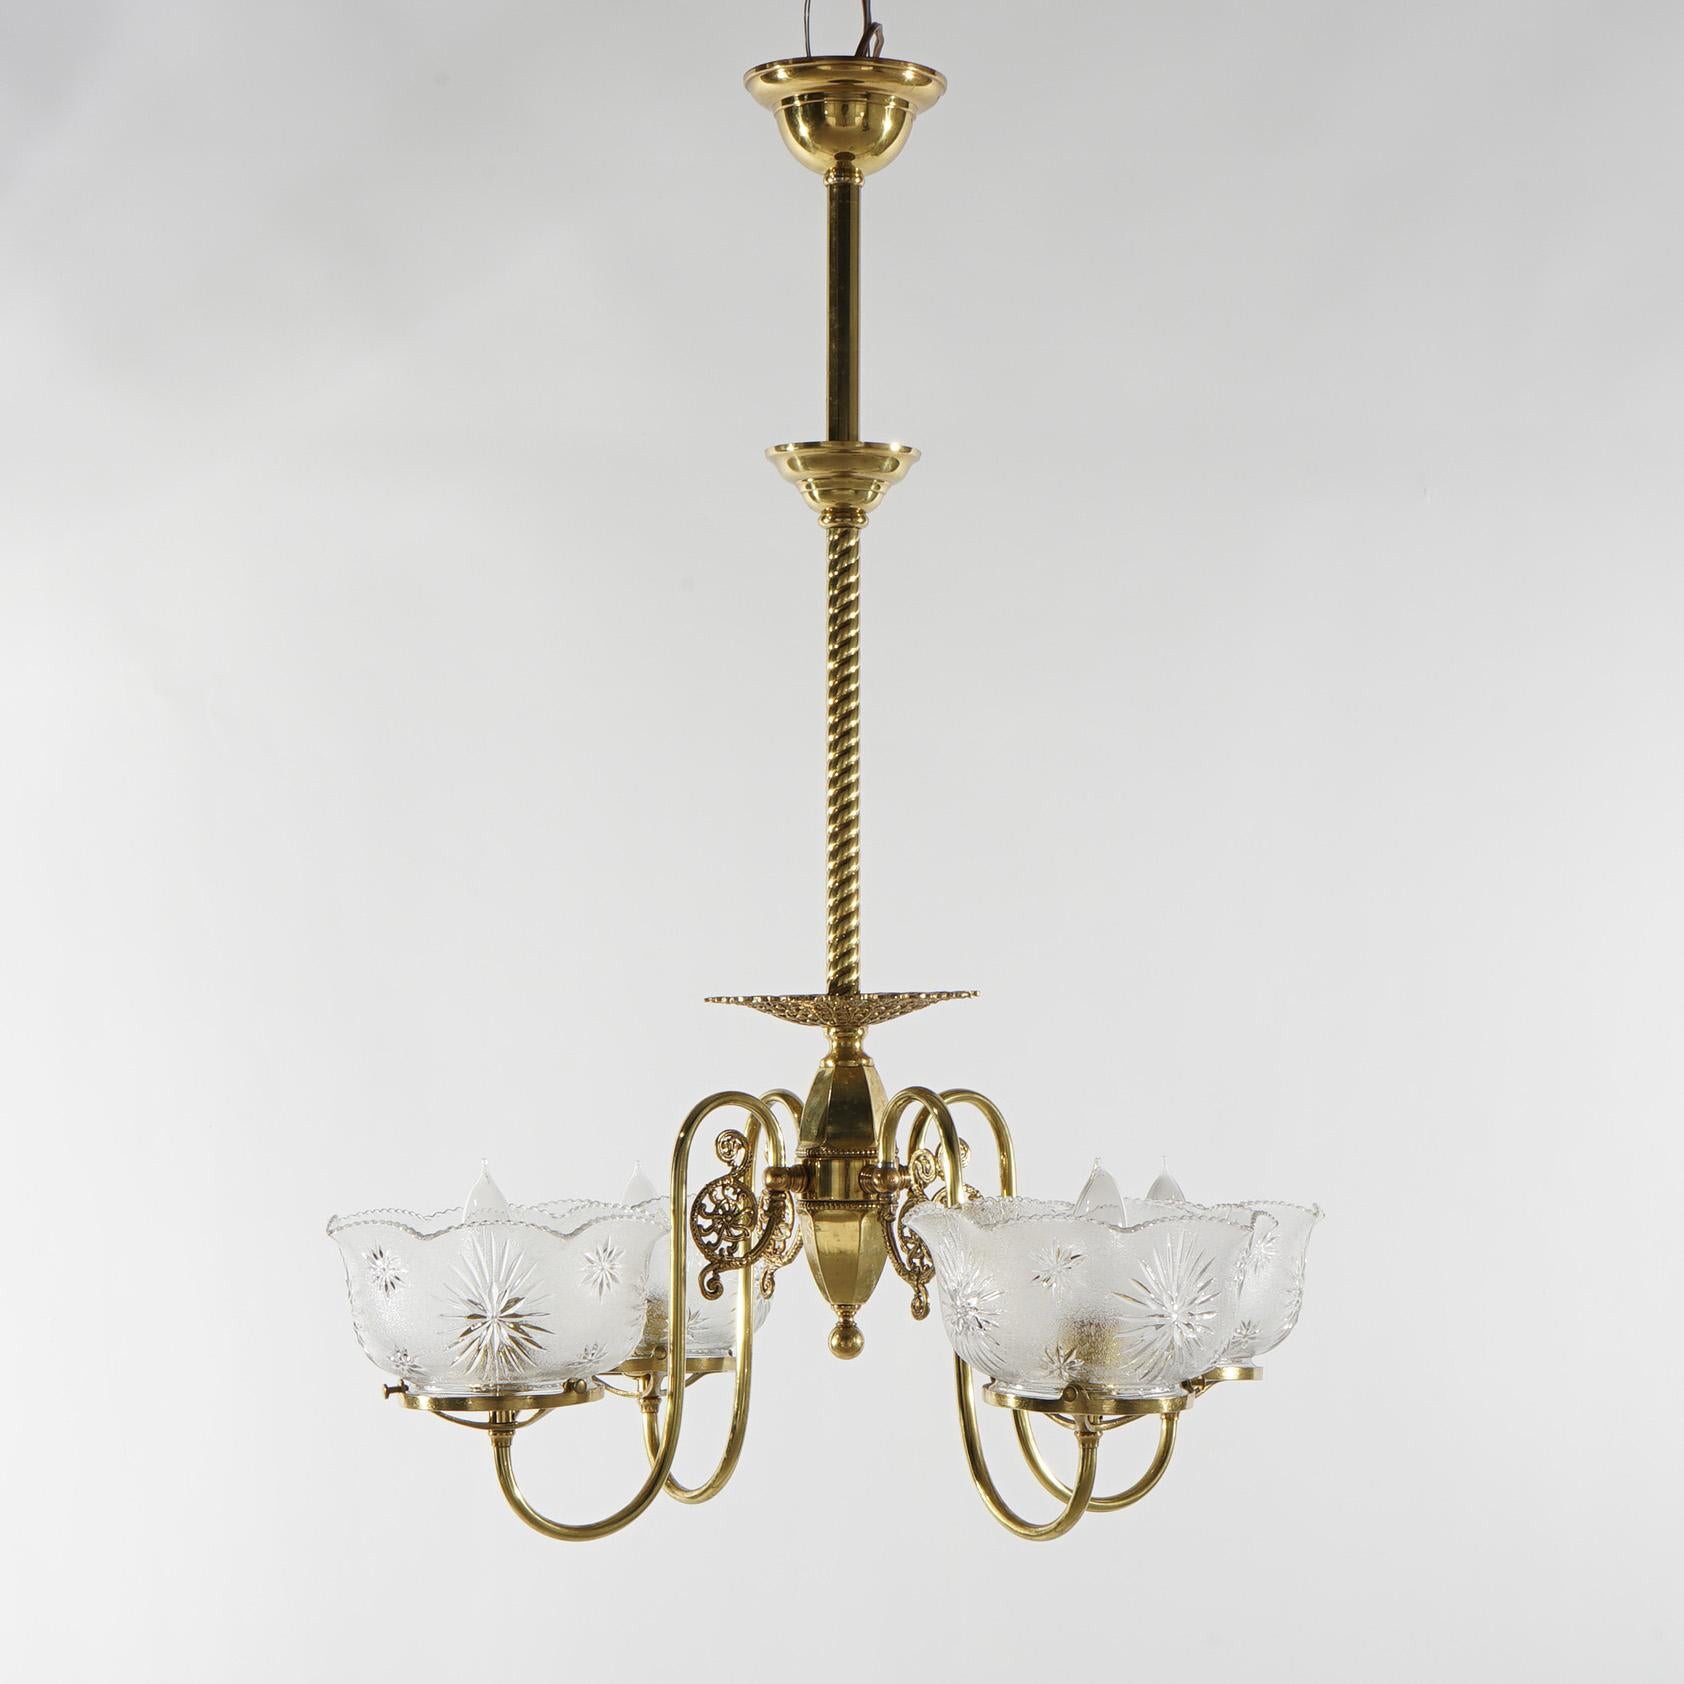 An antique Victorian chandelier offers brass frame with four scroll form arms terminating in lights with glass shades, c1880

Measures - 31